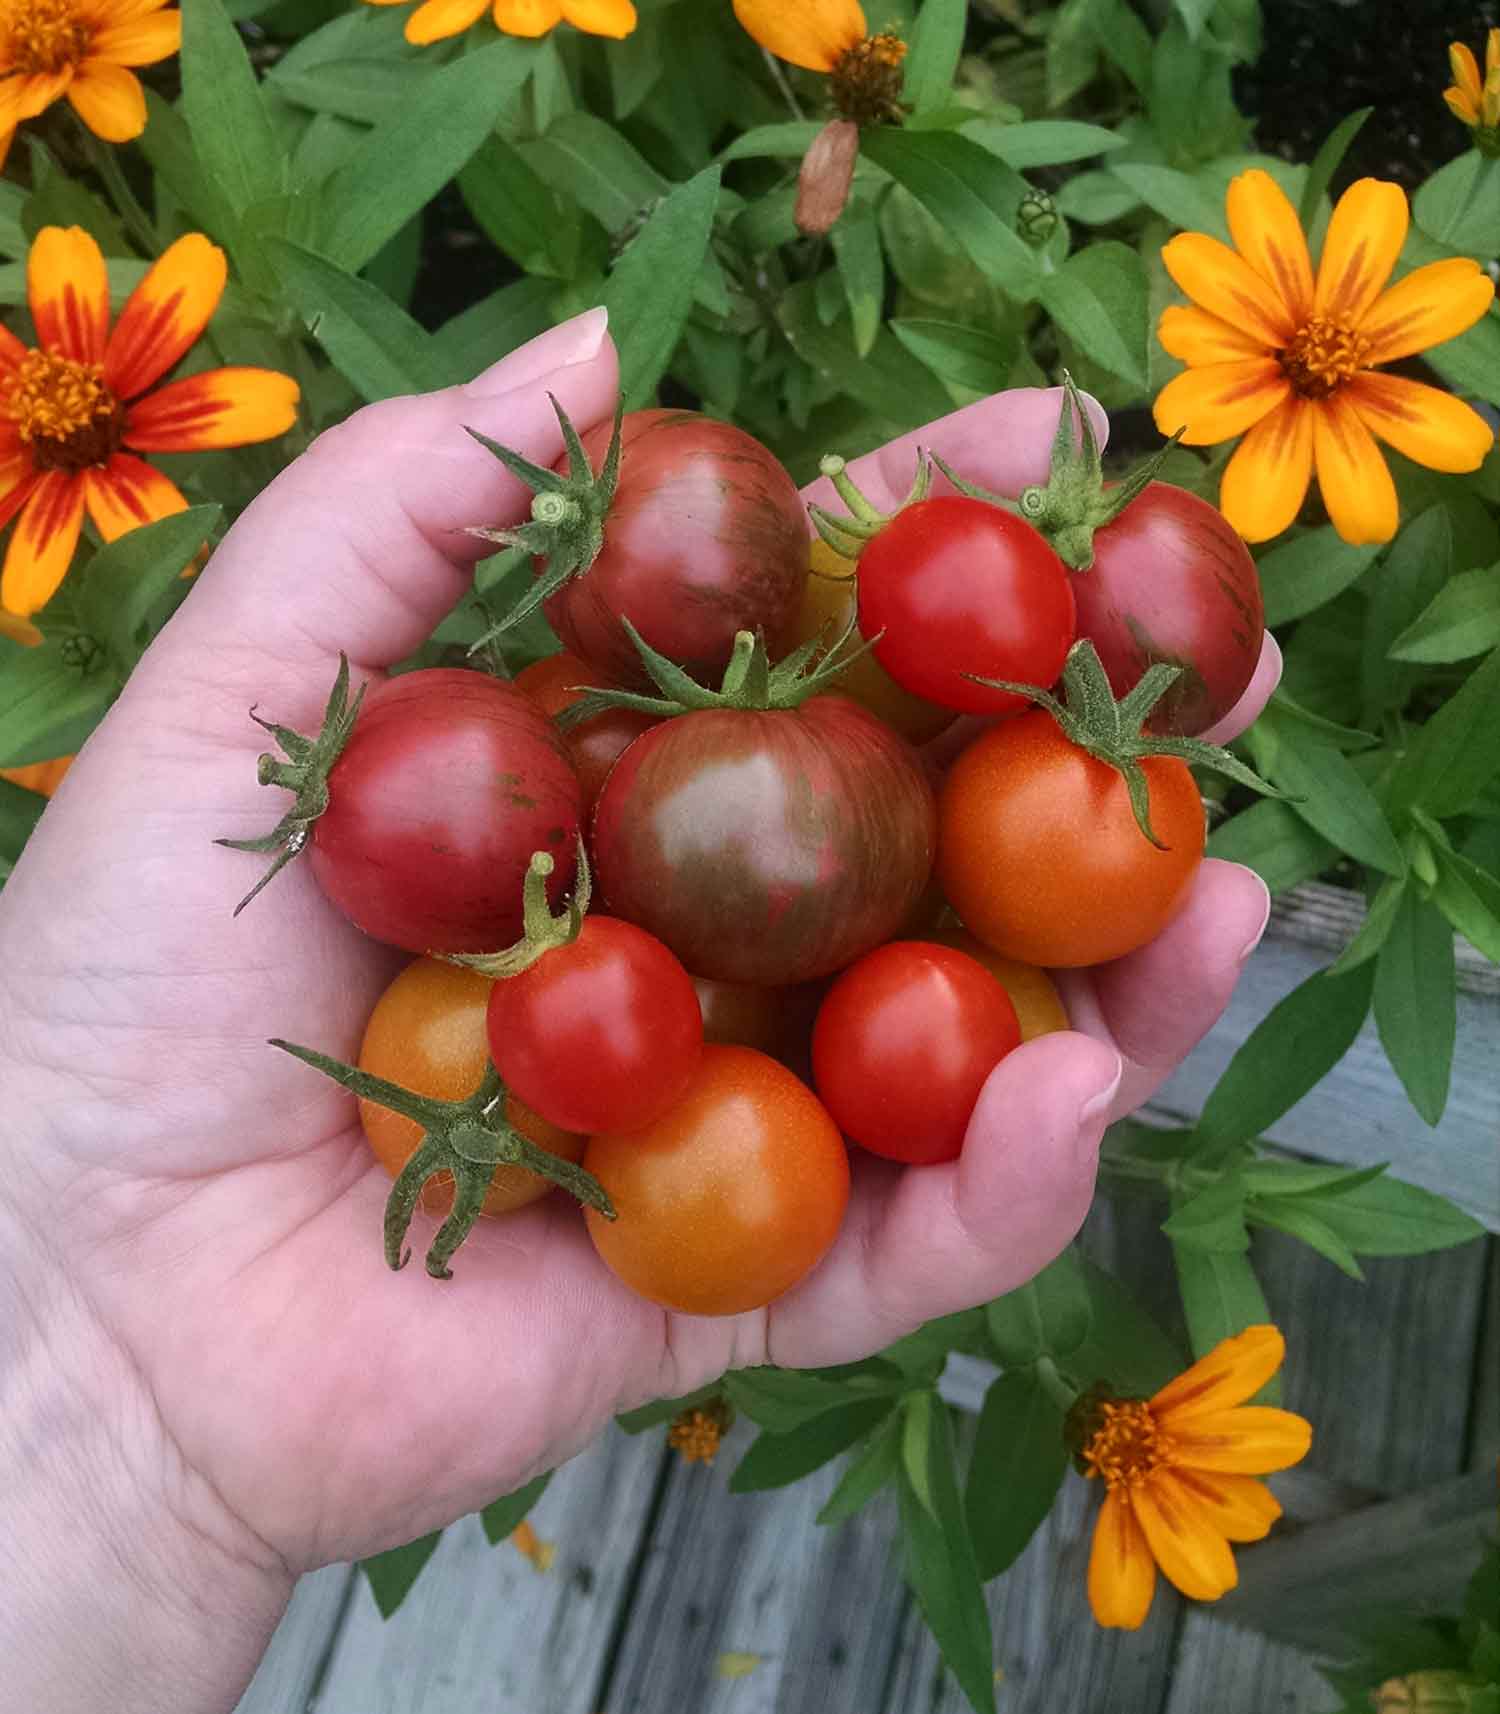 A hand holding freshly harvested cherry tomatoes.